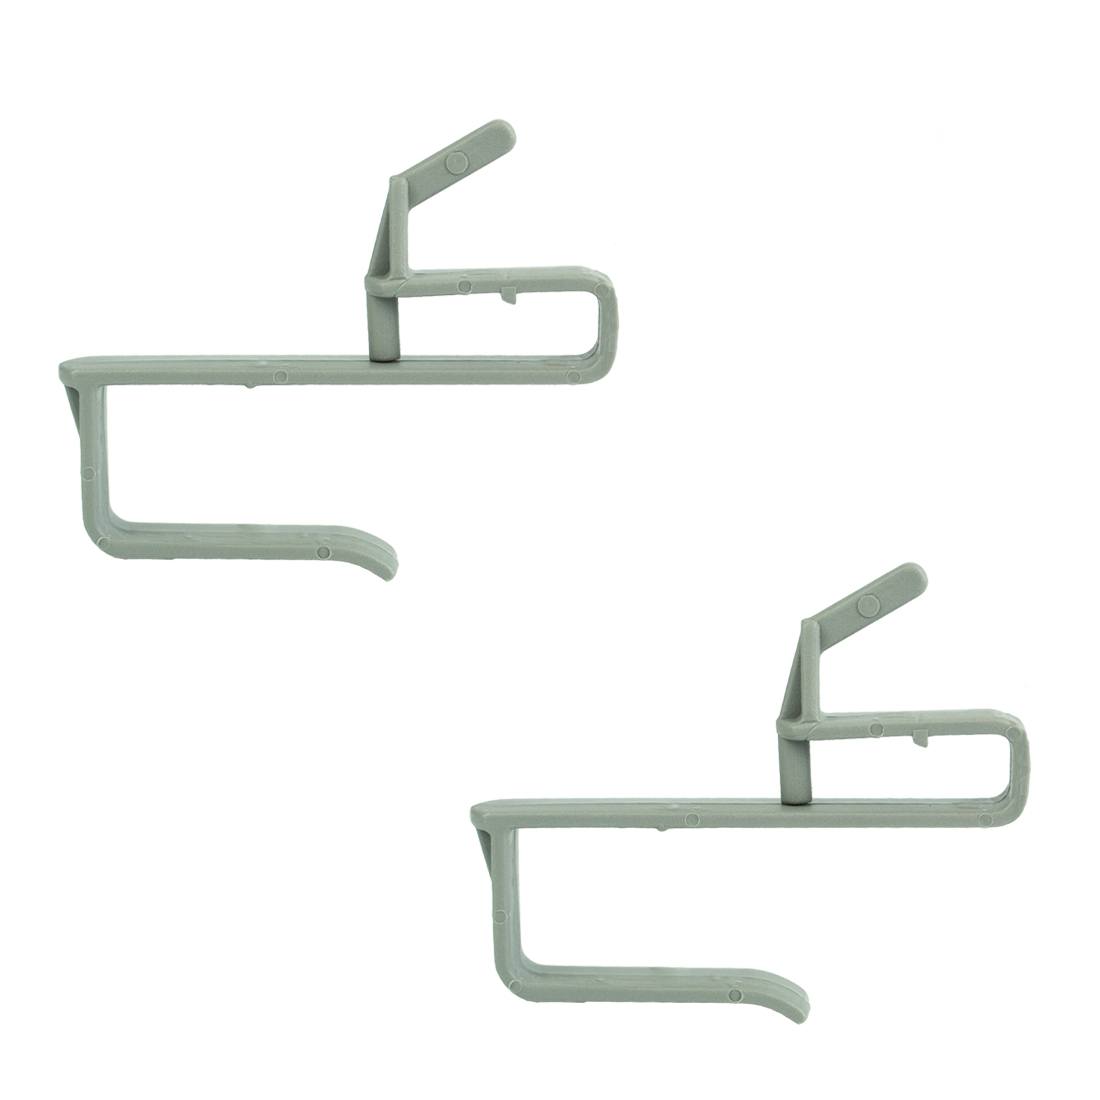 Pulex Large Bucket Clips - Set of Two - Top and Bottom View